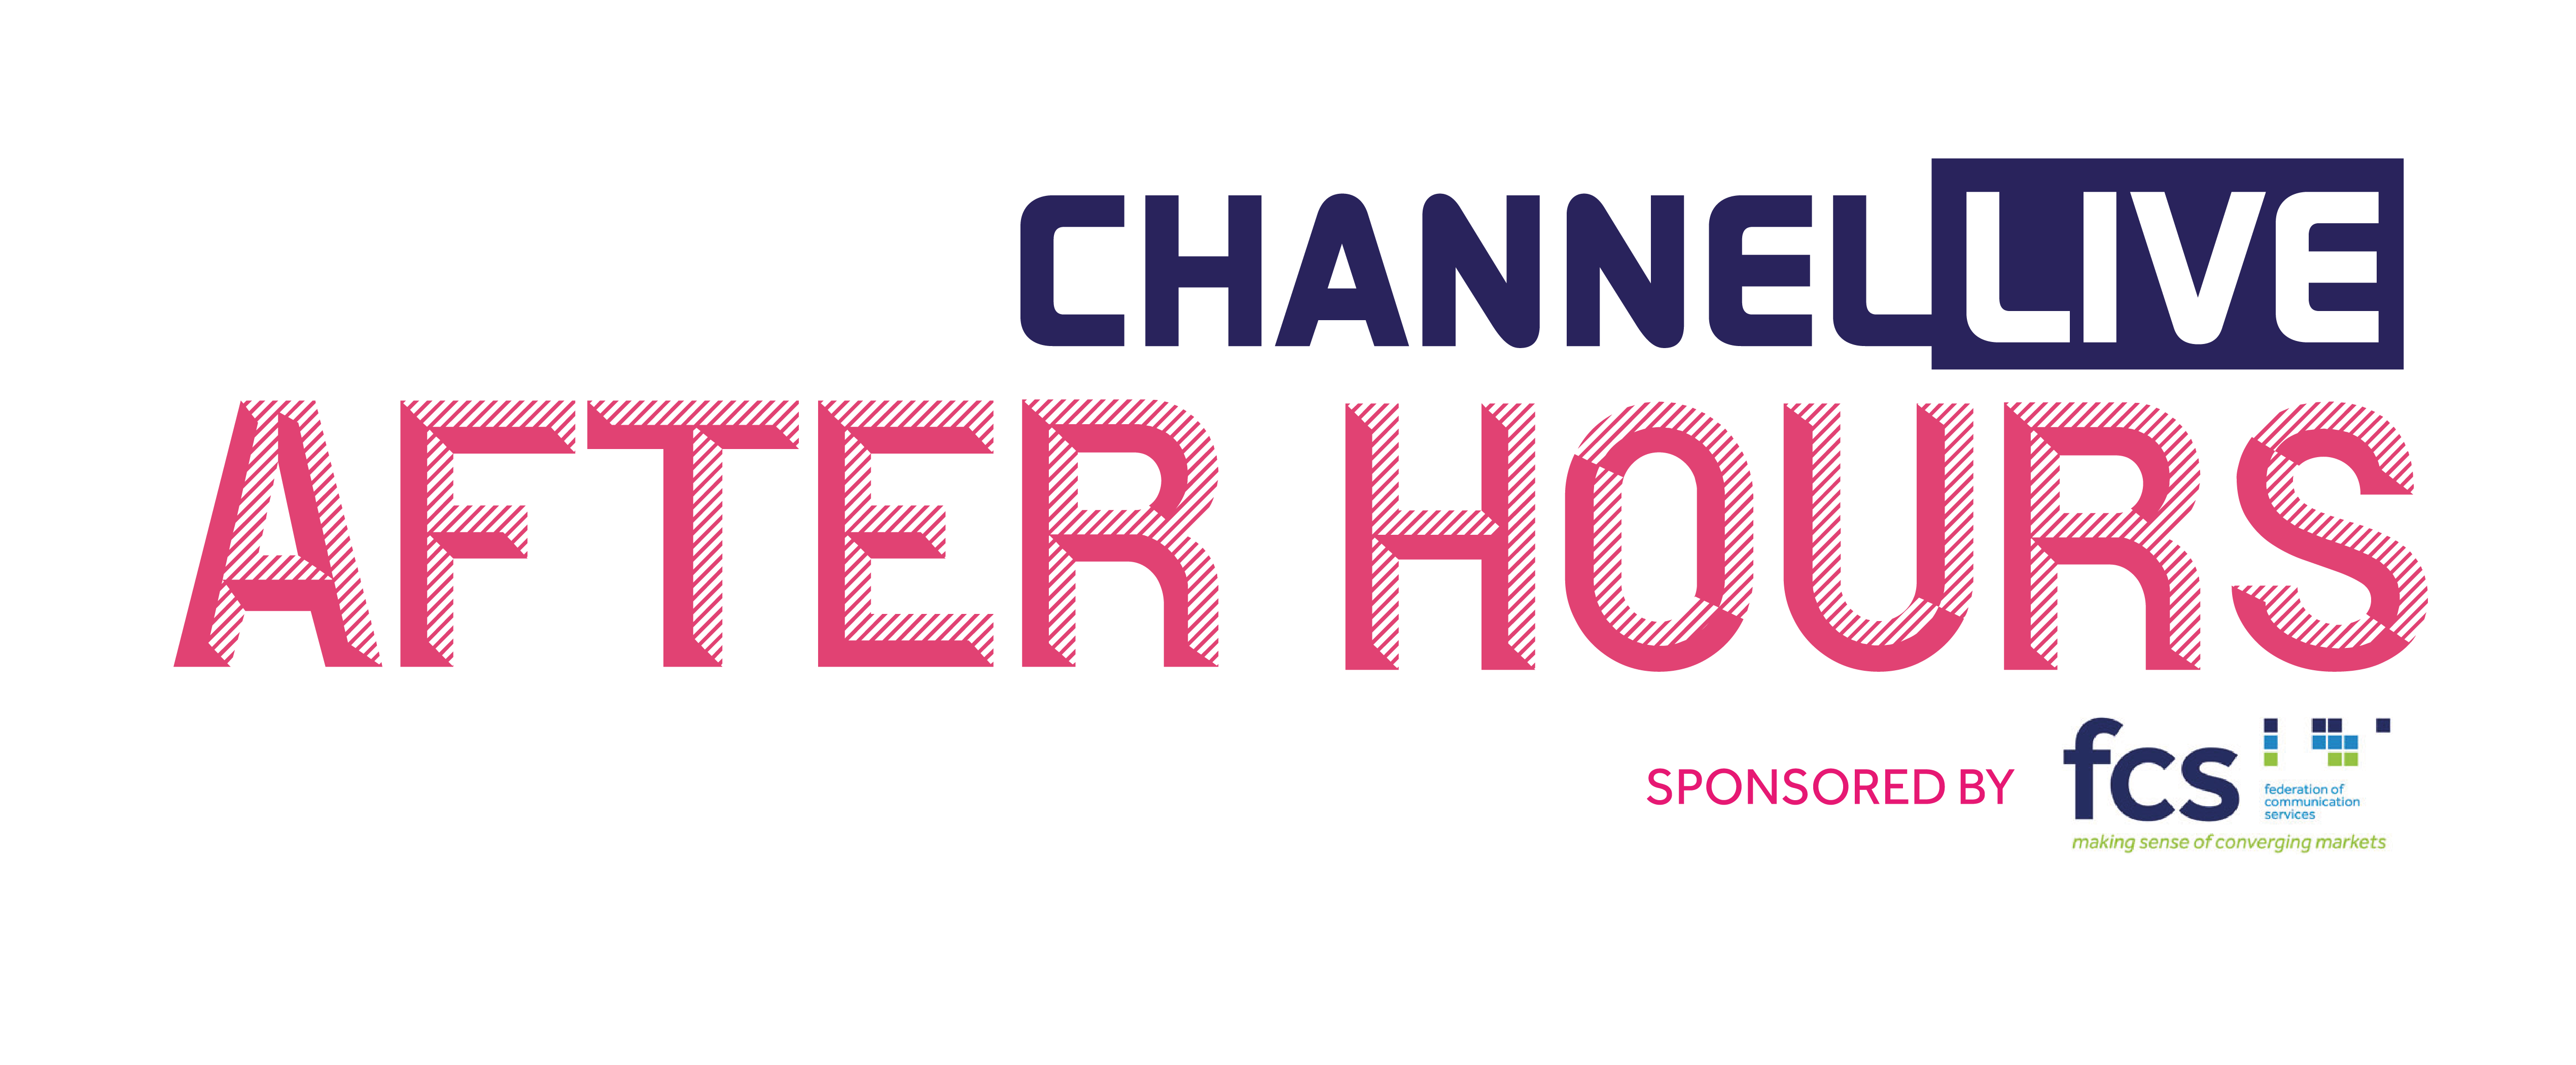 Channel Live After Hours